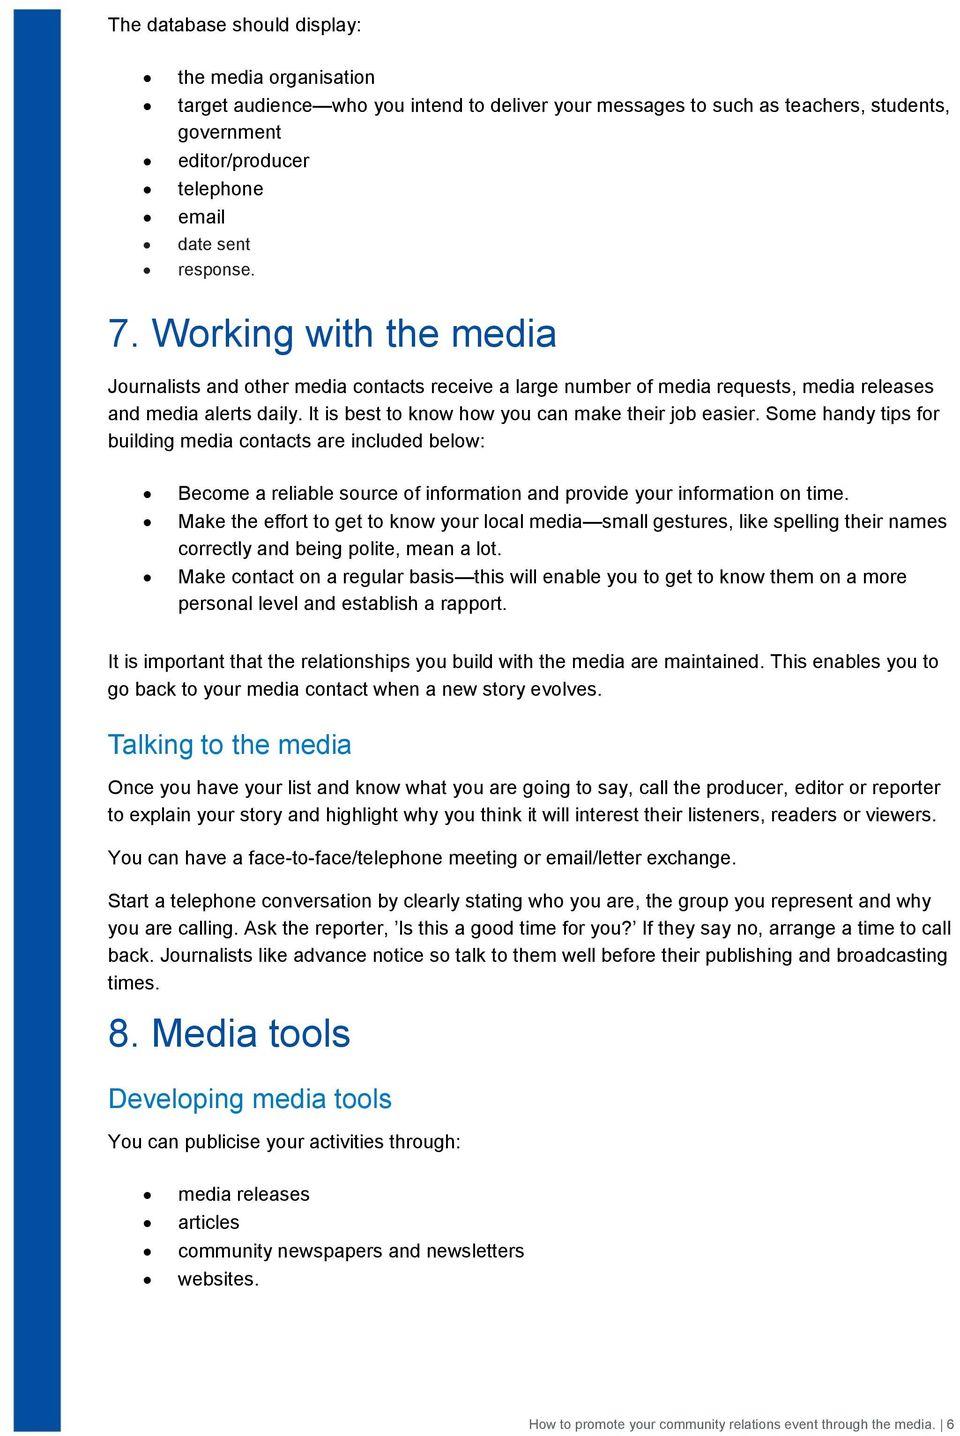 It is best to know how you can make their job easier. Some handy tips for building media contacts are included below: Become a reliable source of information and provide your information on time.